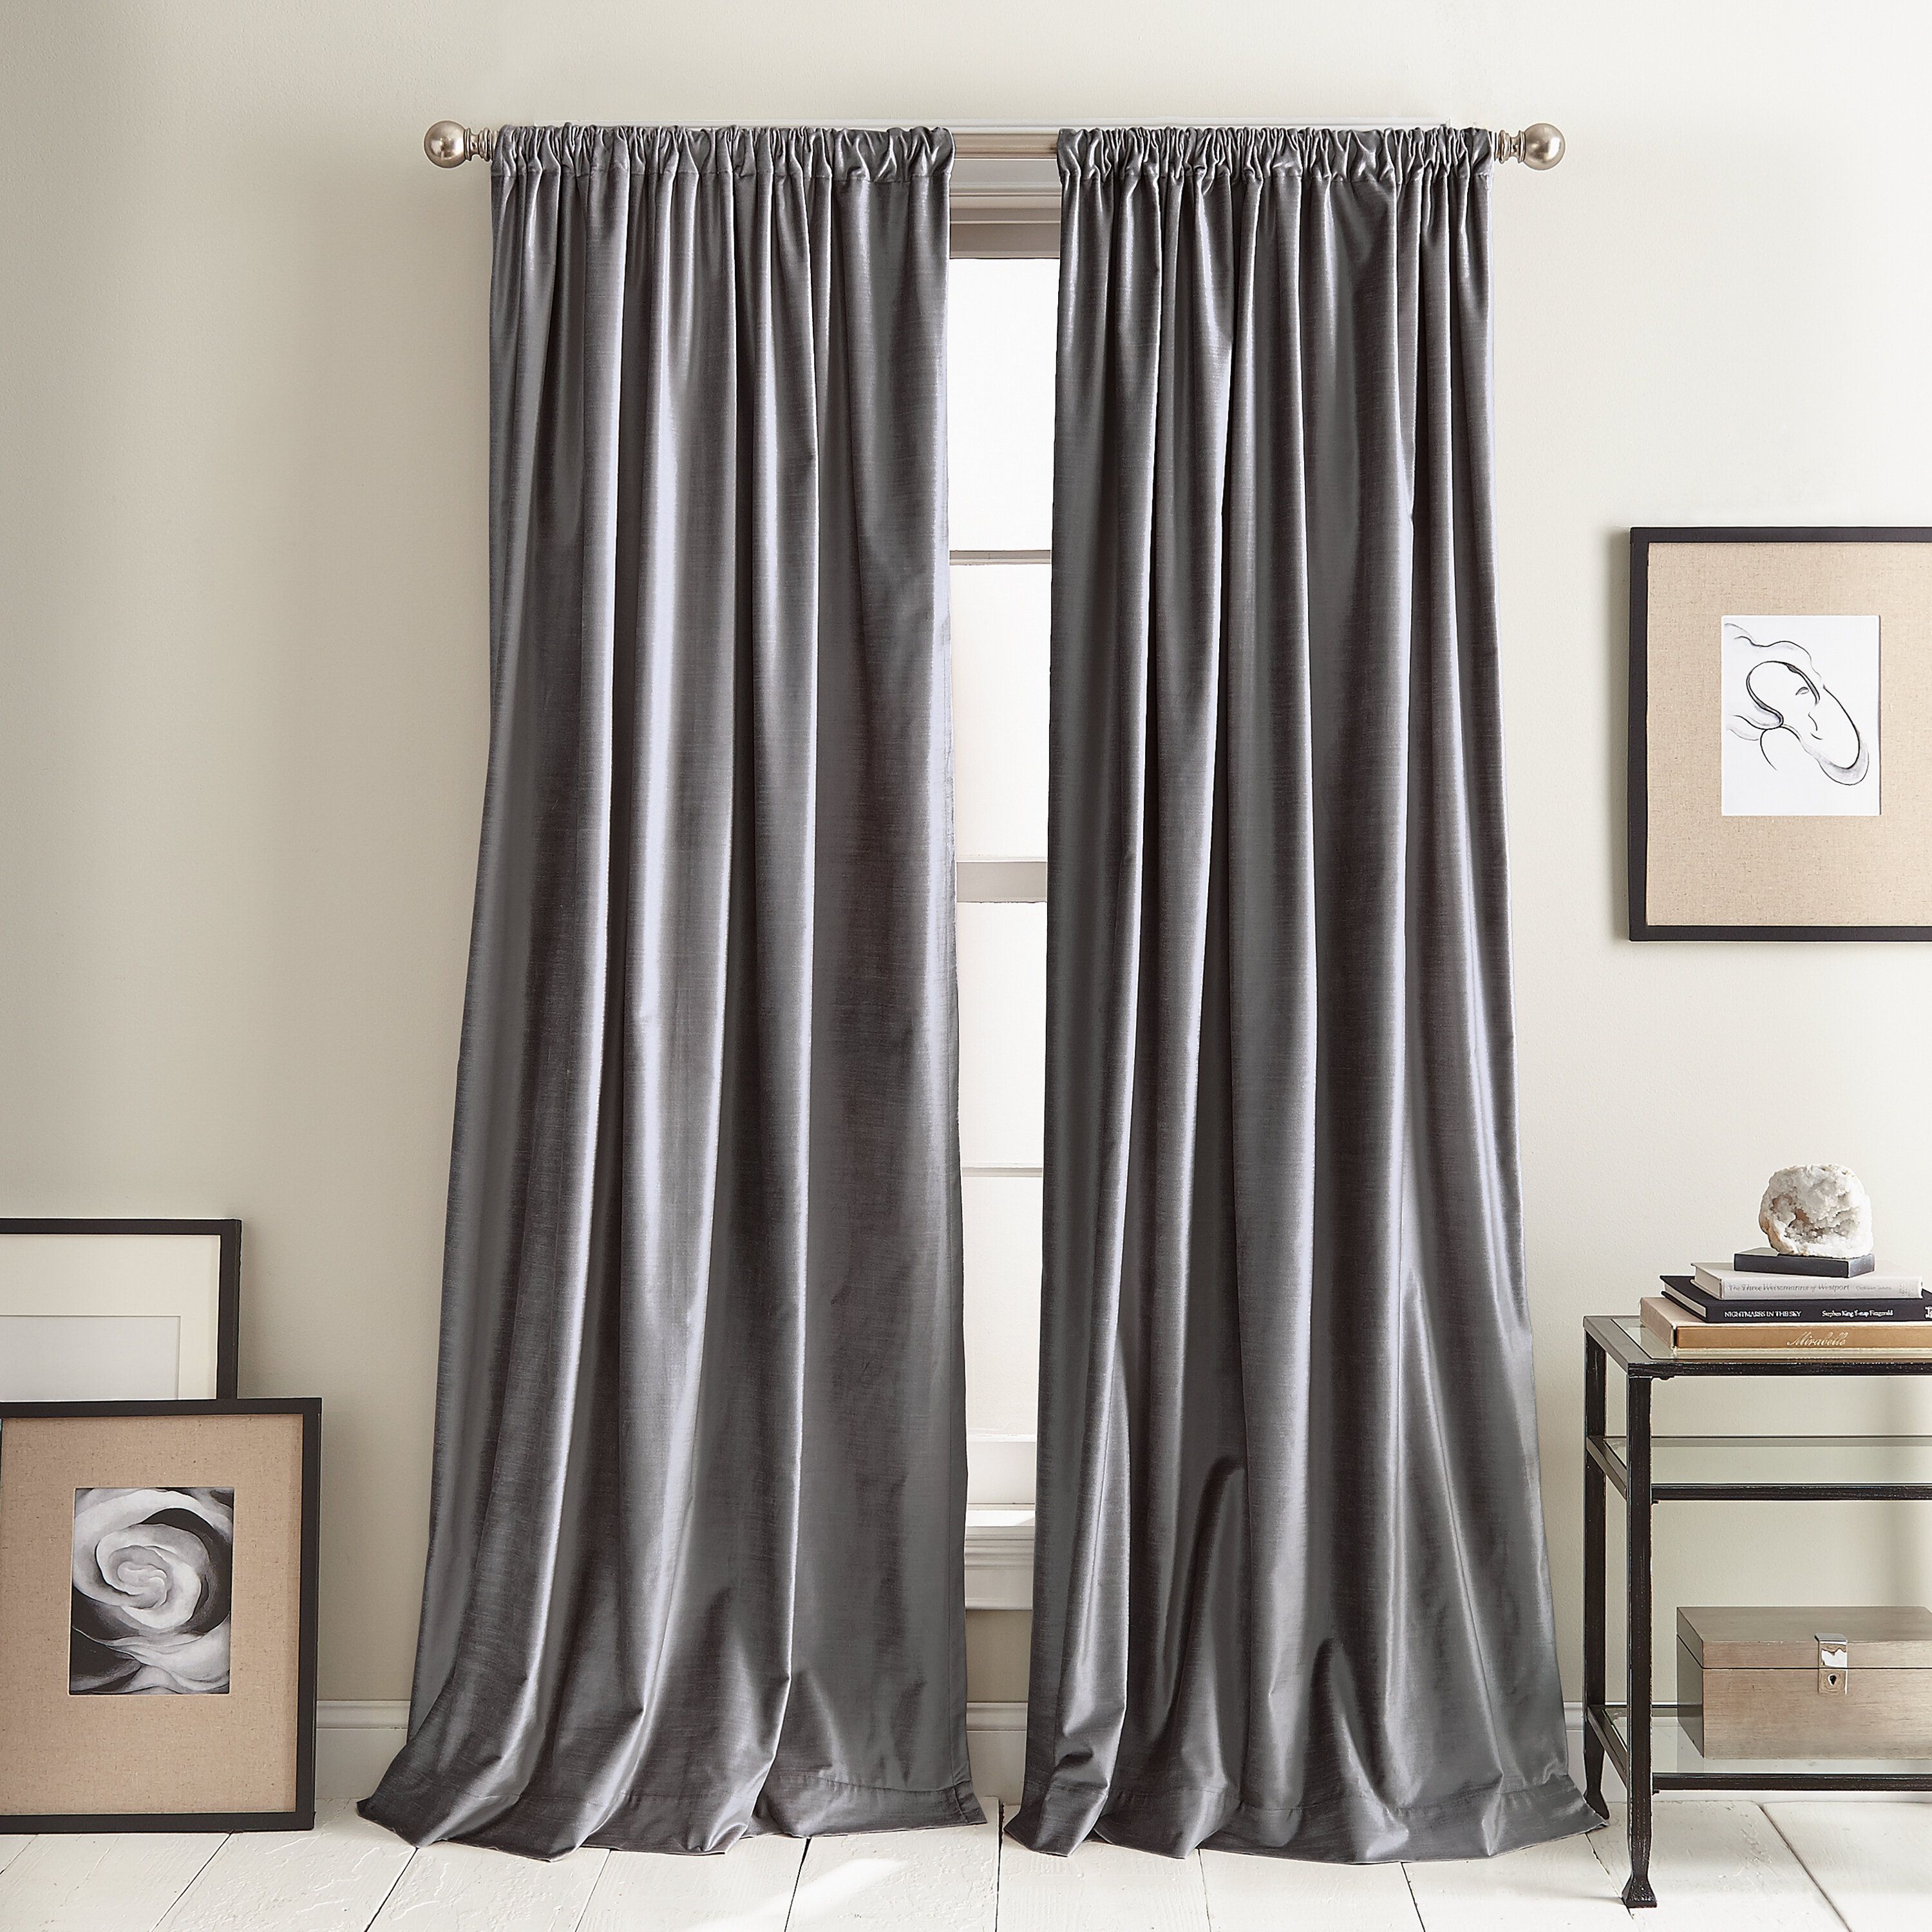 Modern Knotted Solid Room Darkening Rod Pocket Curtain Intended For Knotted Tab Top Window Curtain Panel Pairs (View 12 of 20)